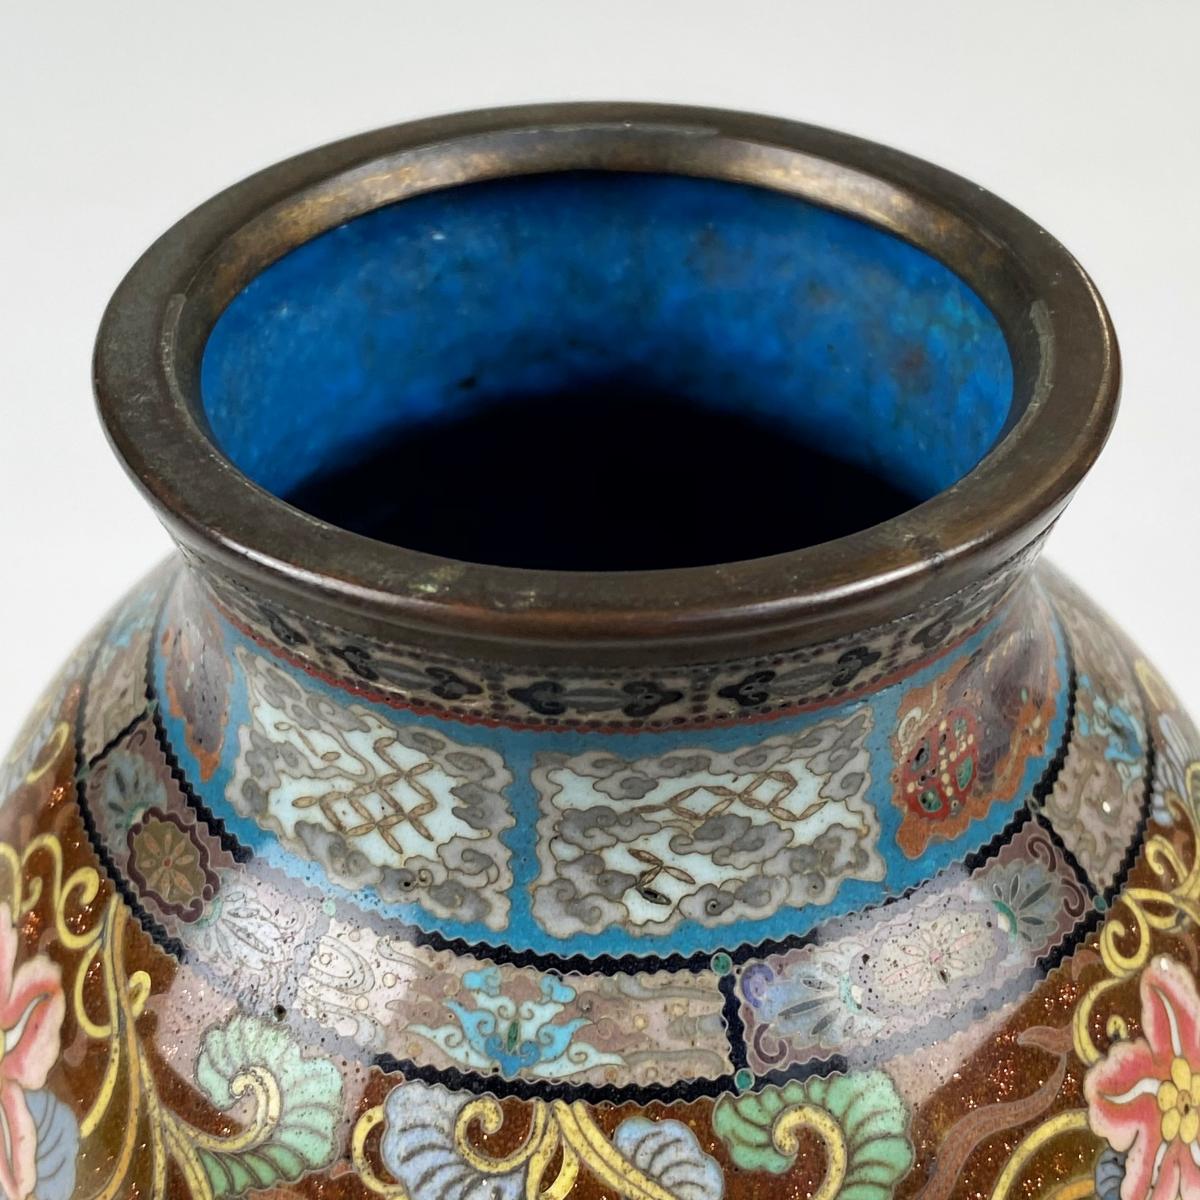 A small, yet dramatic pair of late 19th Century Japanese cloisonne vases